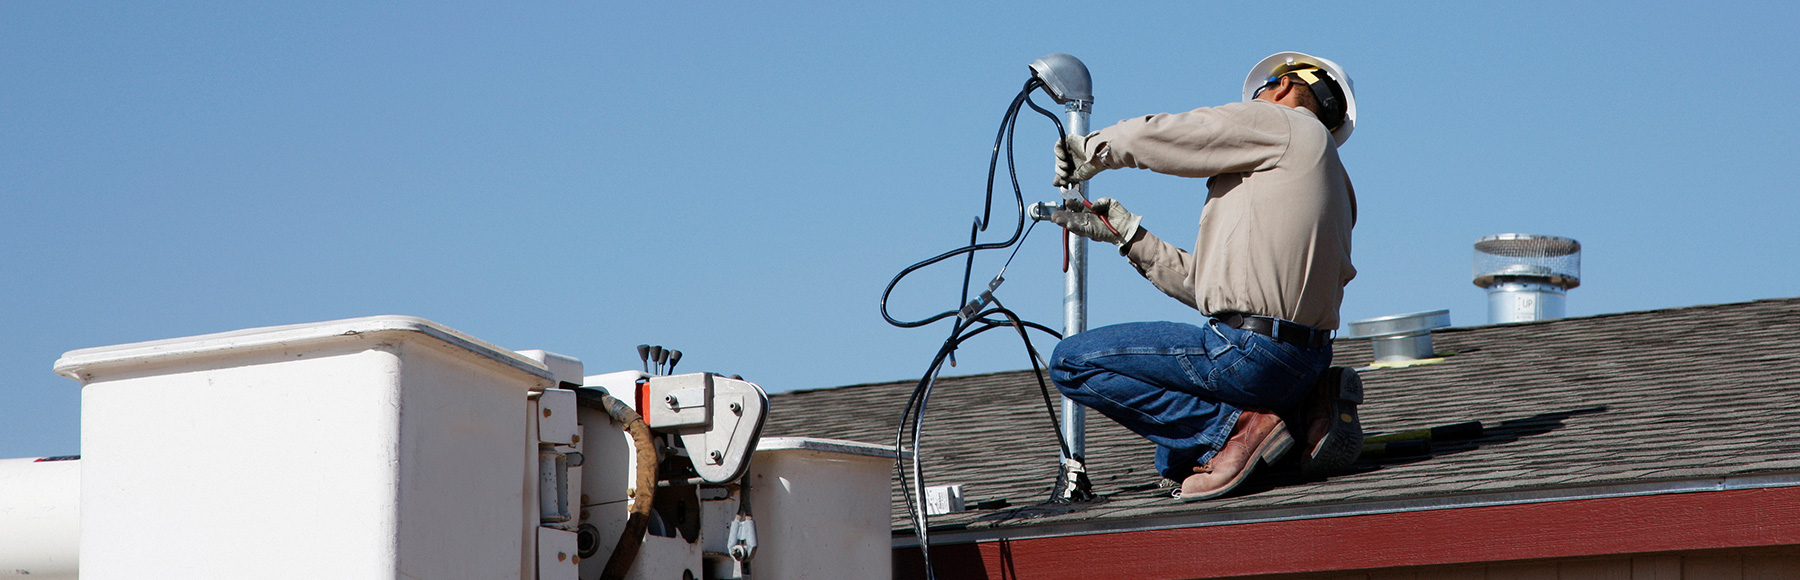 Electrician on roof 